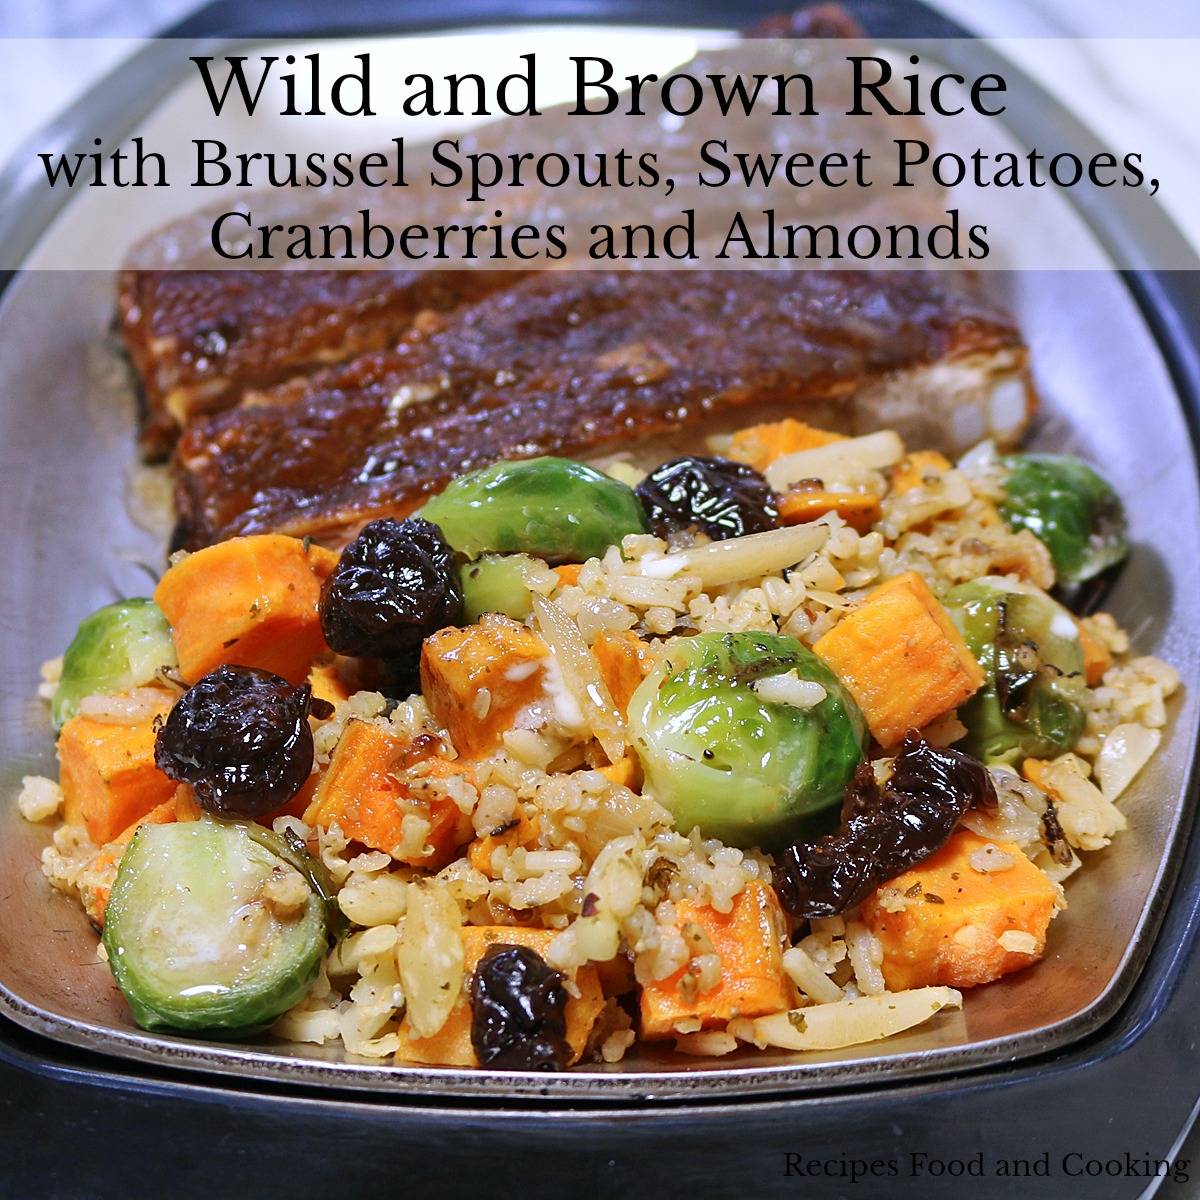 Wild and Brown Rice with Brussel Sprouts, Sweet Potatoes, Cranberries and Almonds